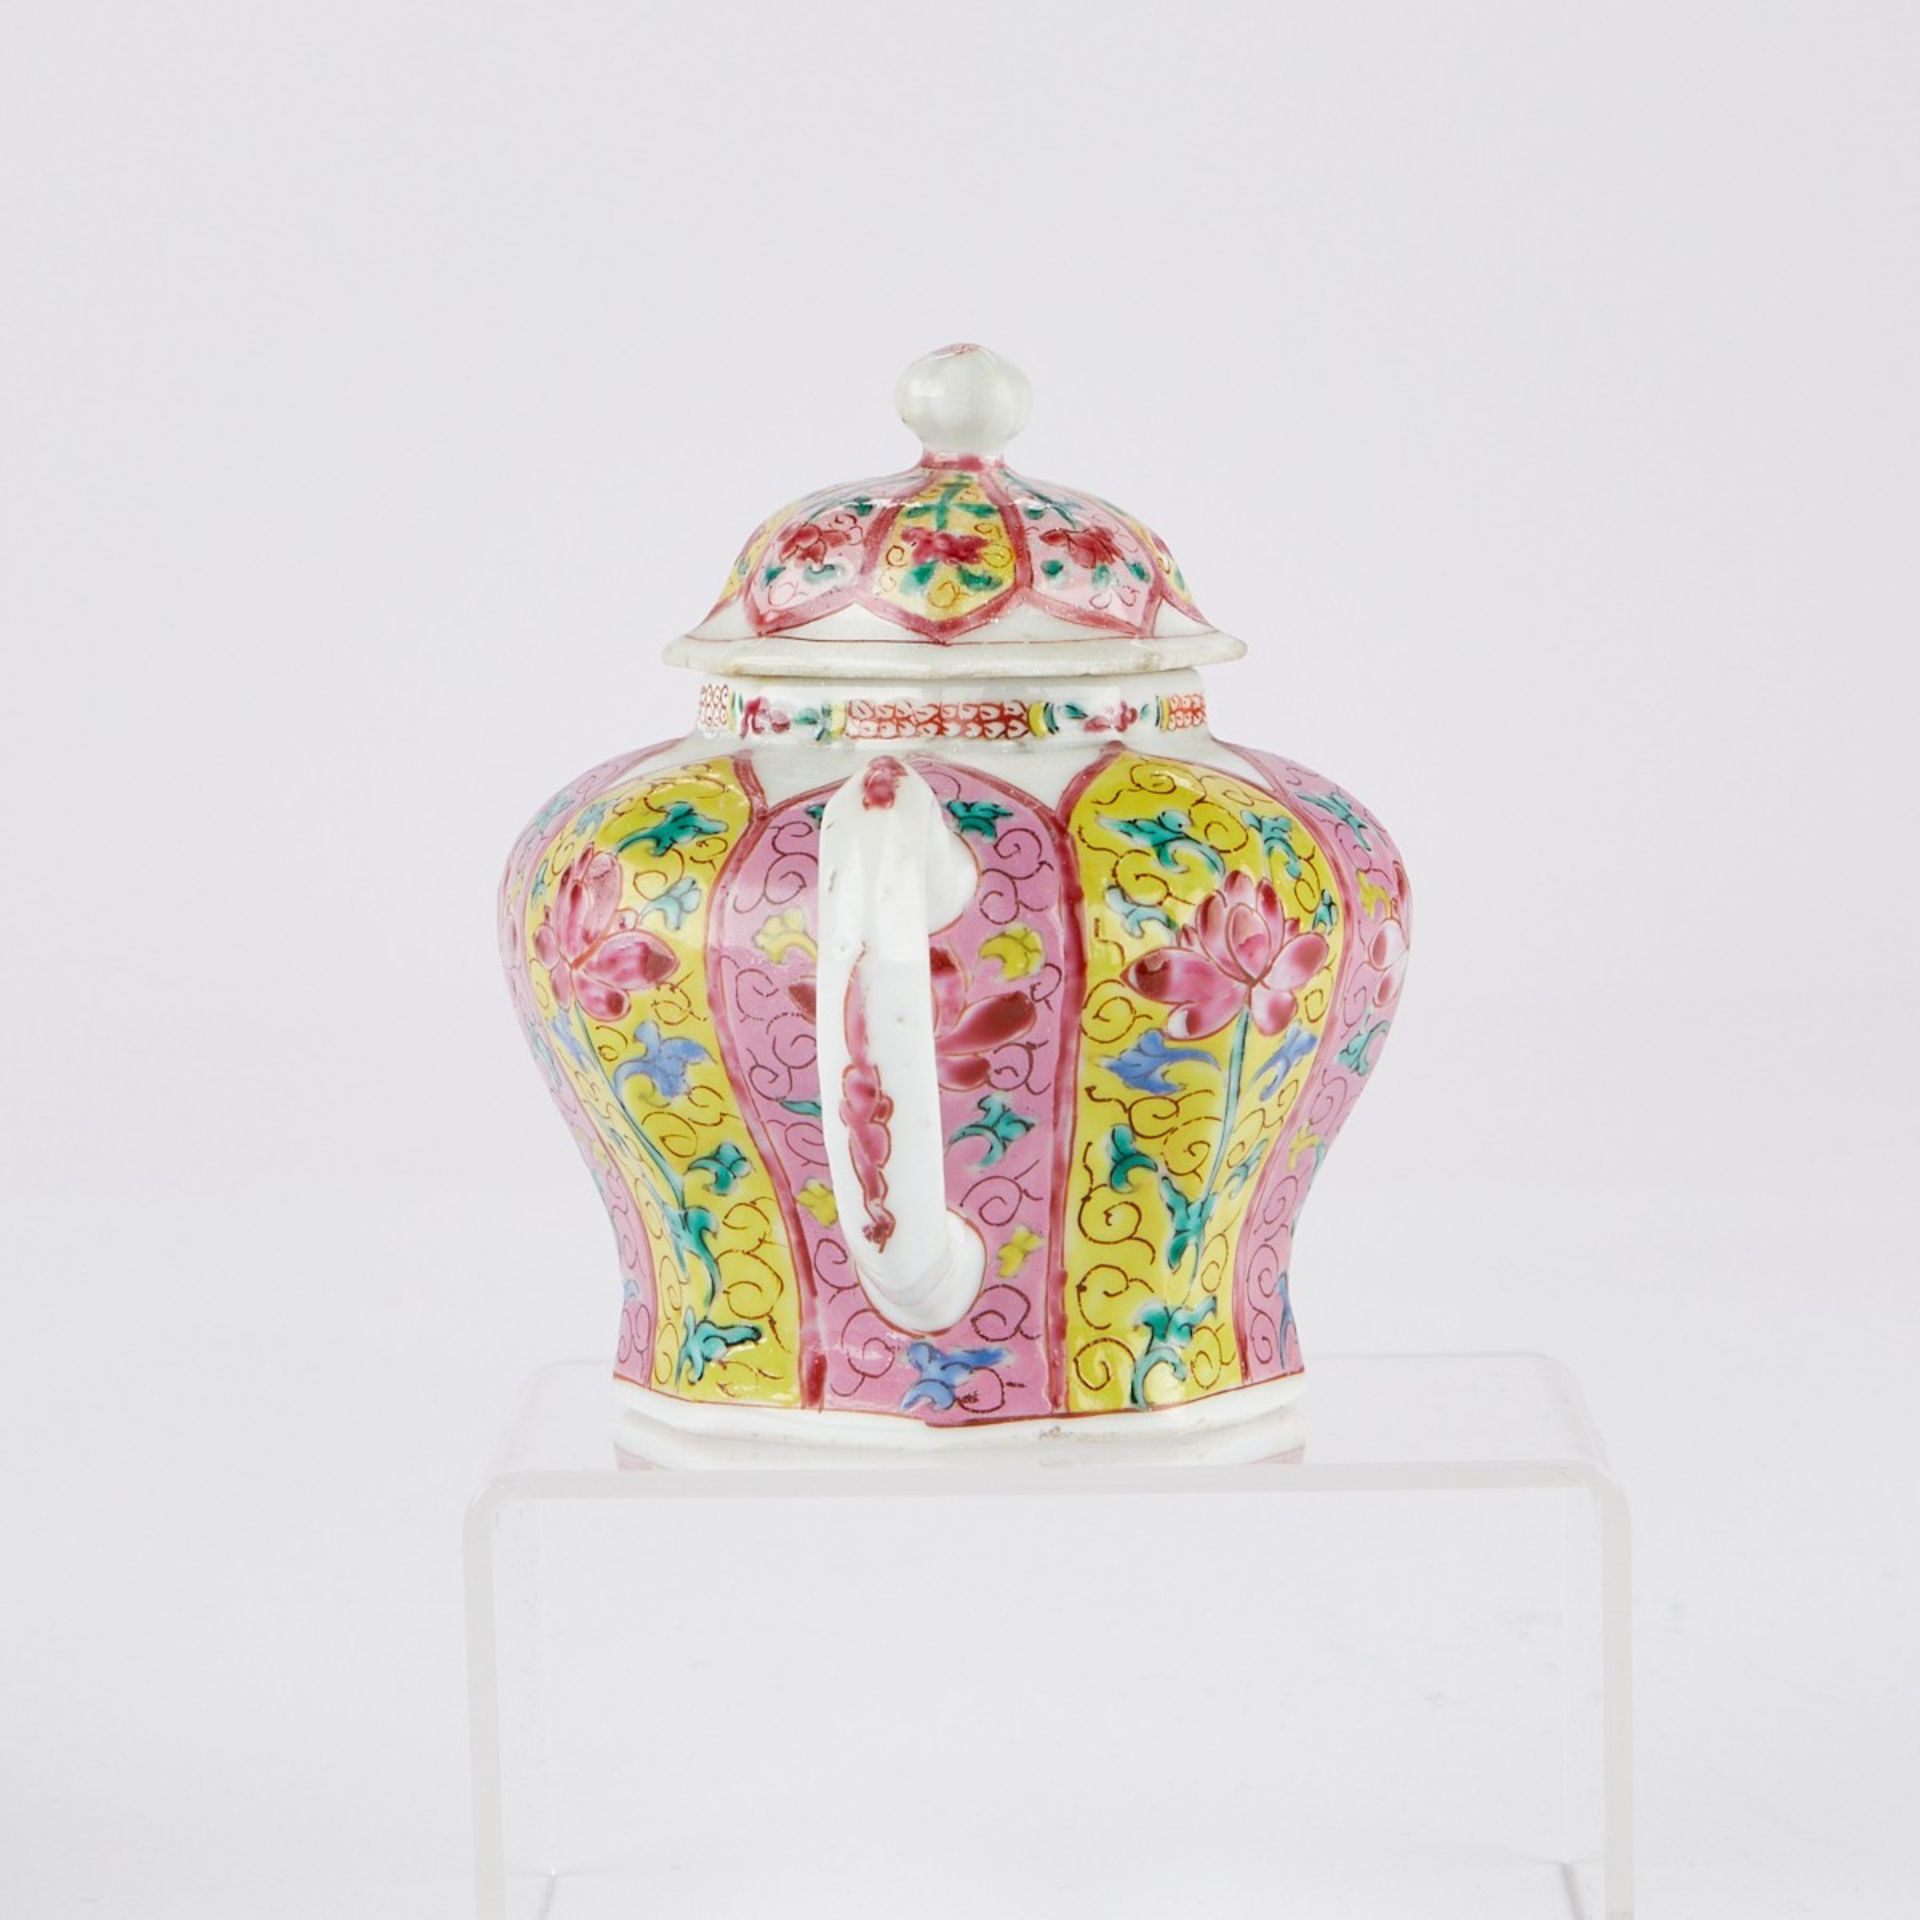 18th c. Chinese Export Porcelain Teapot and Undertray - Image 6 of 7